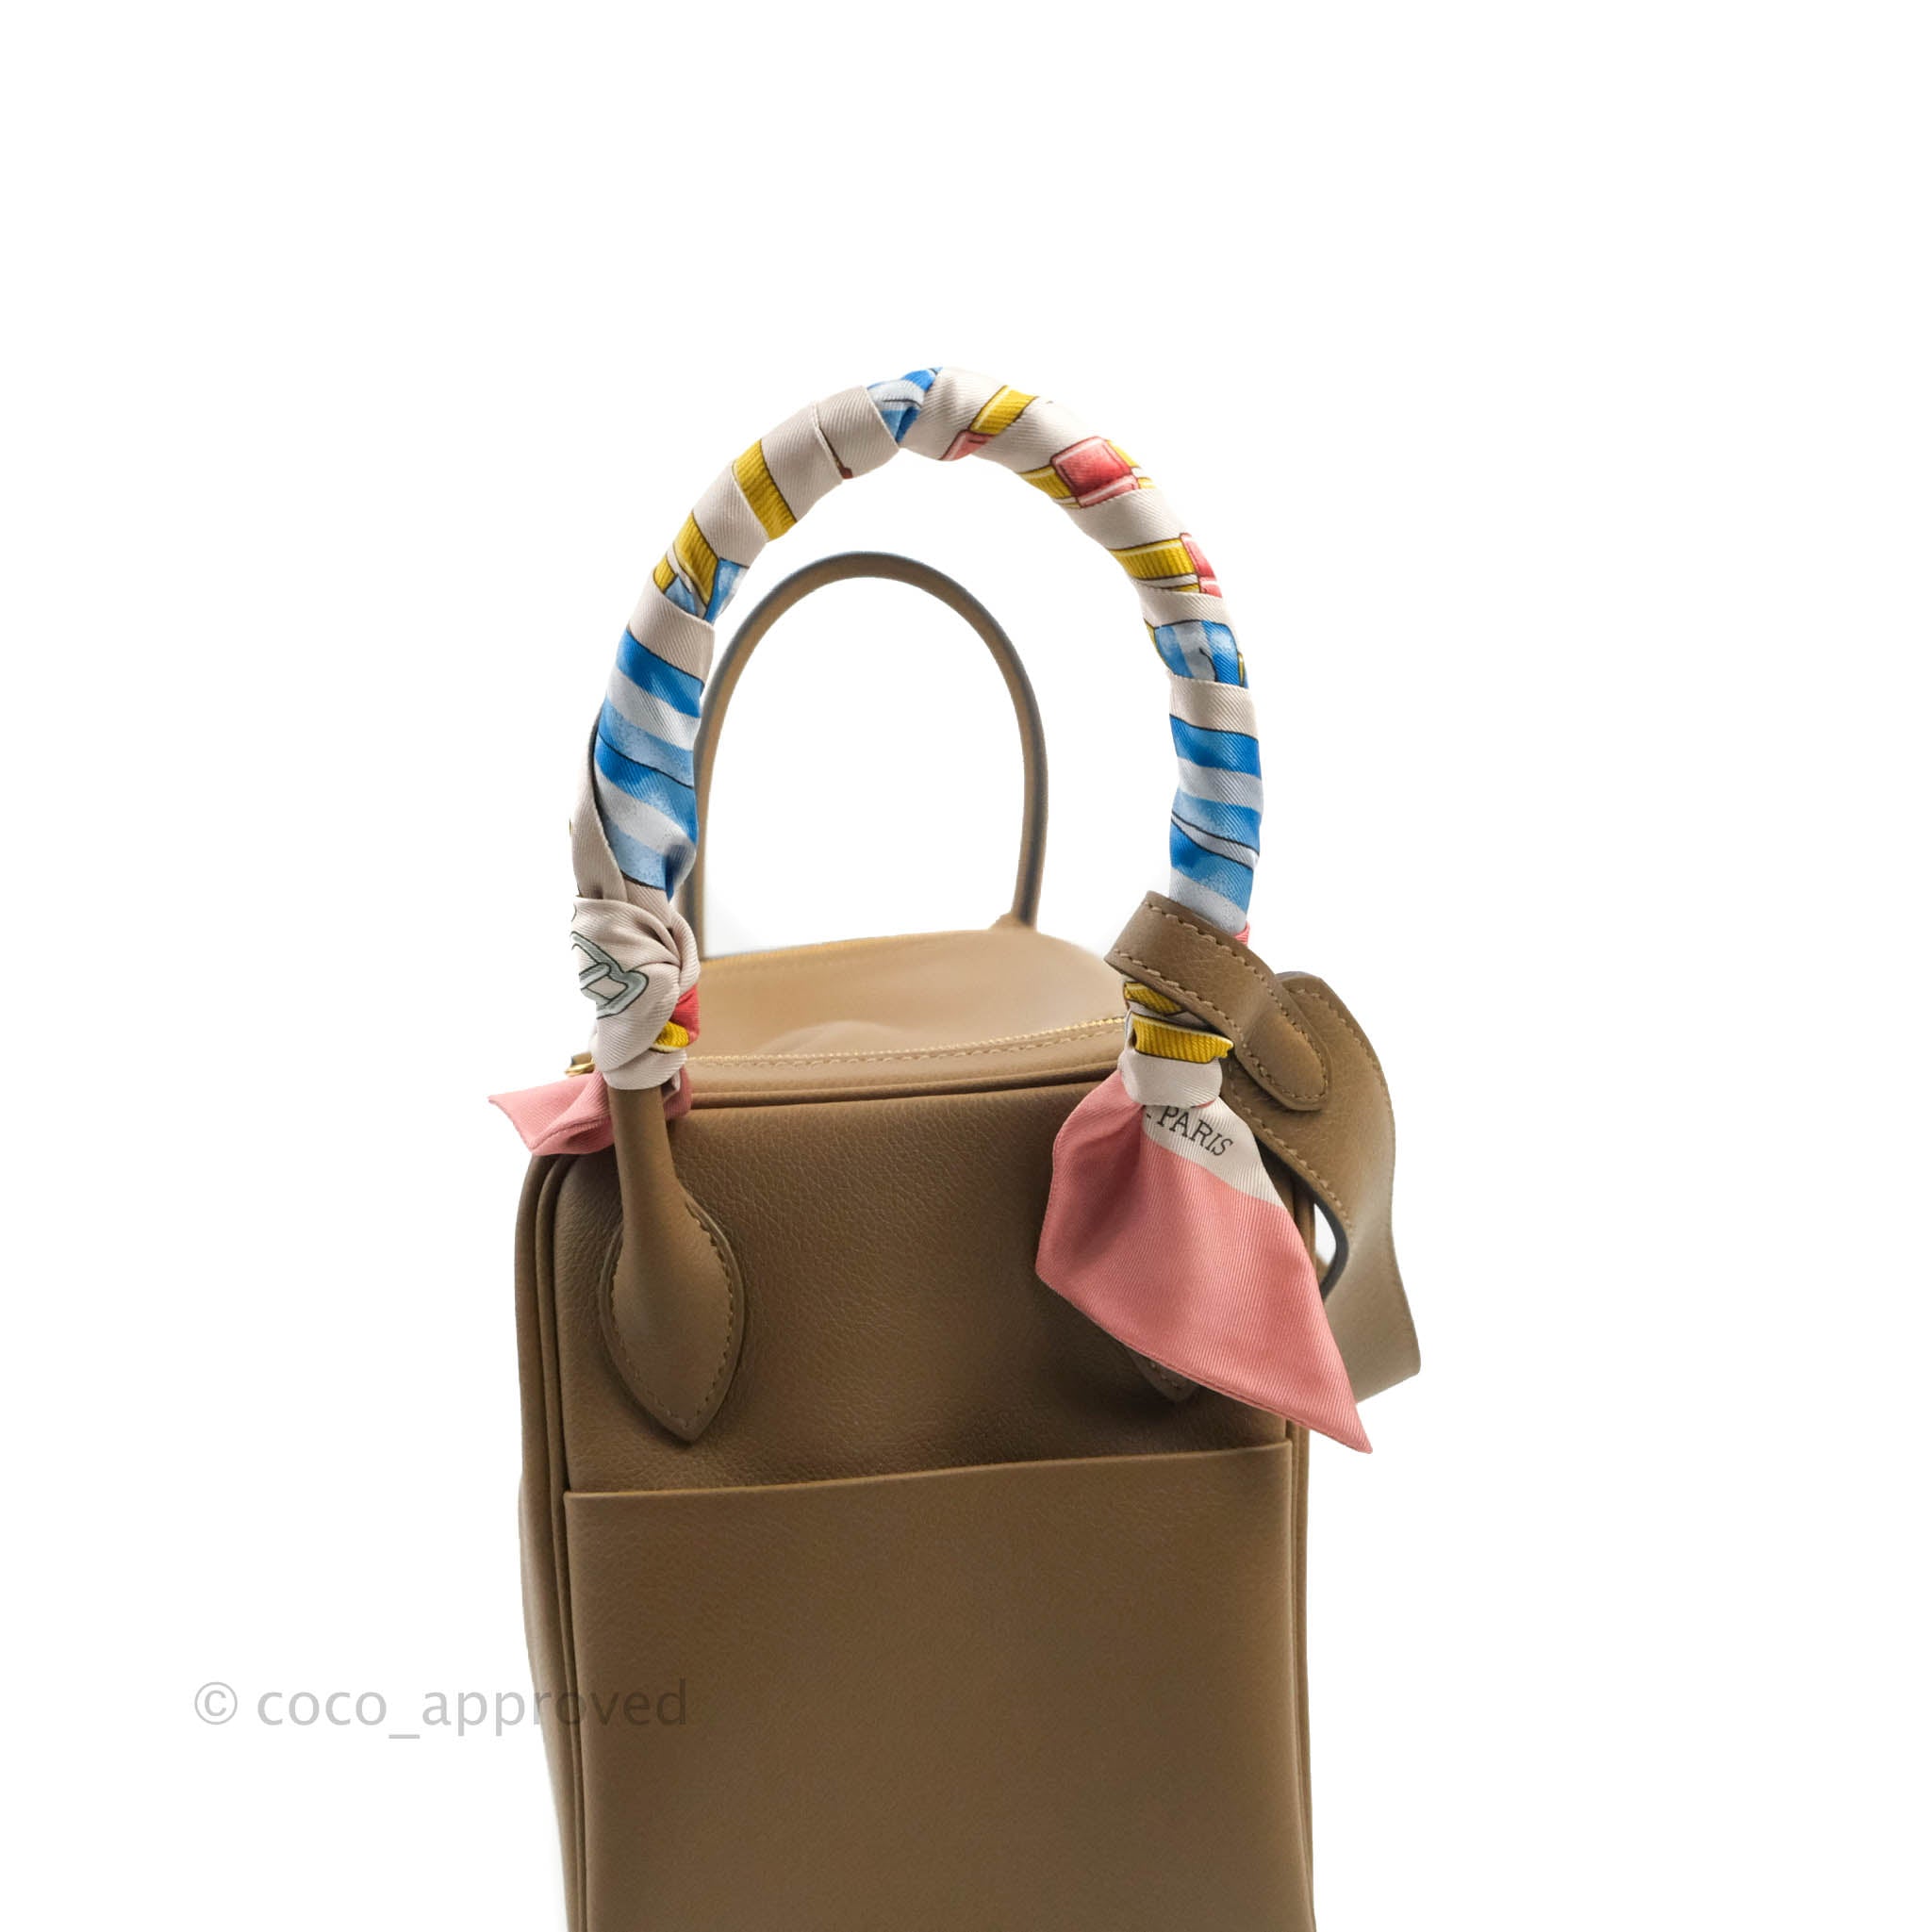 Hermès Lindy 26 Evercolour Sienne Gold Hardware – Coco Approved Studio